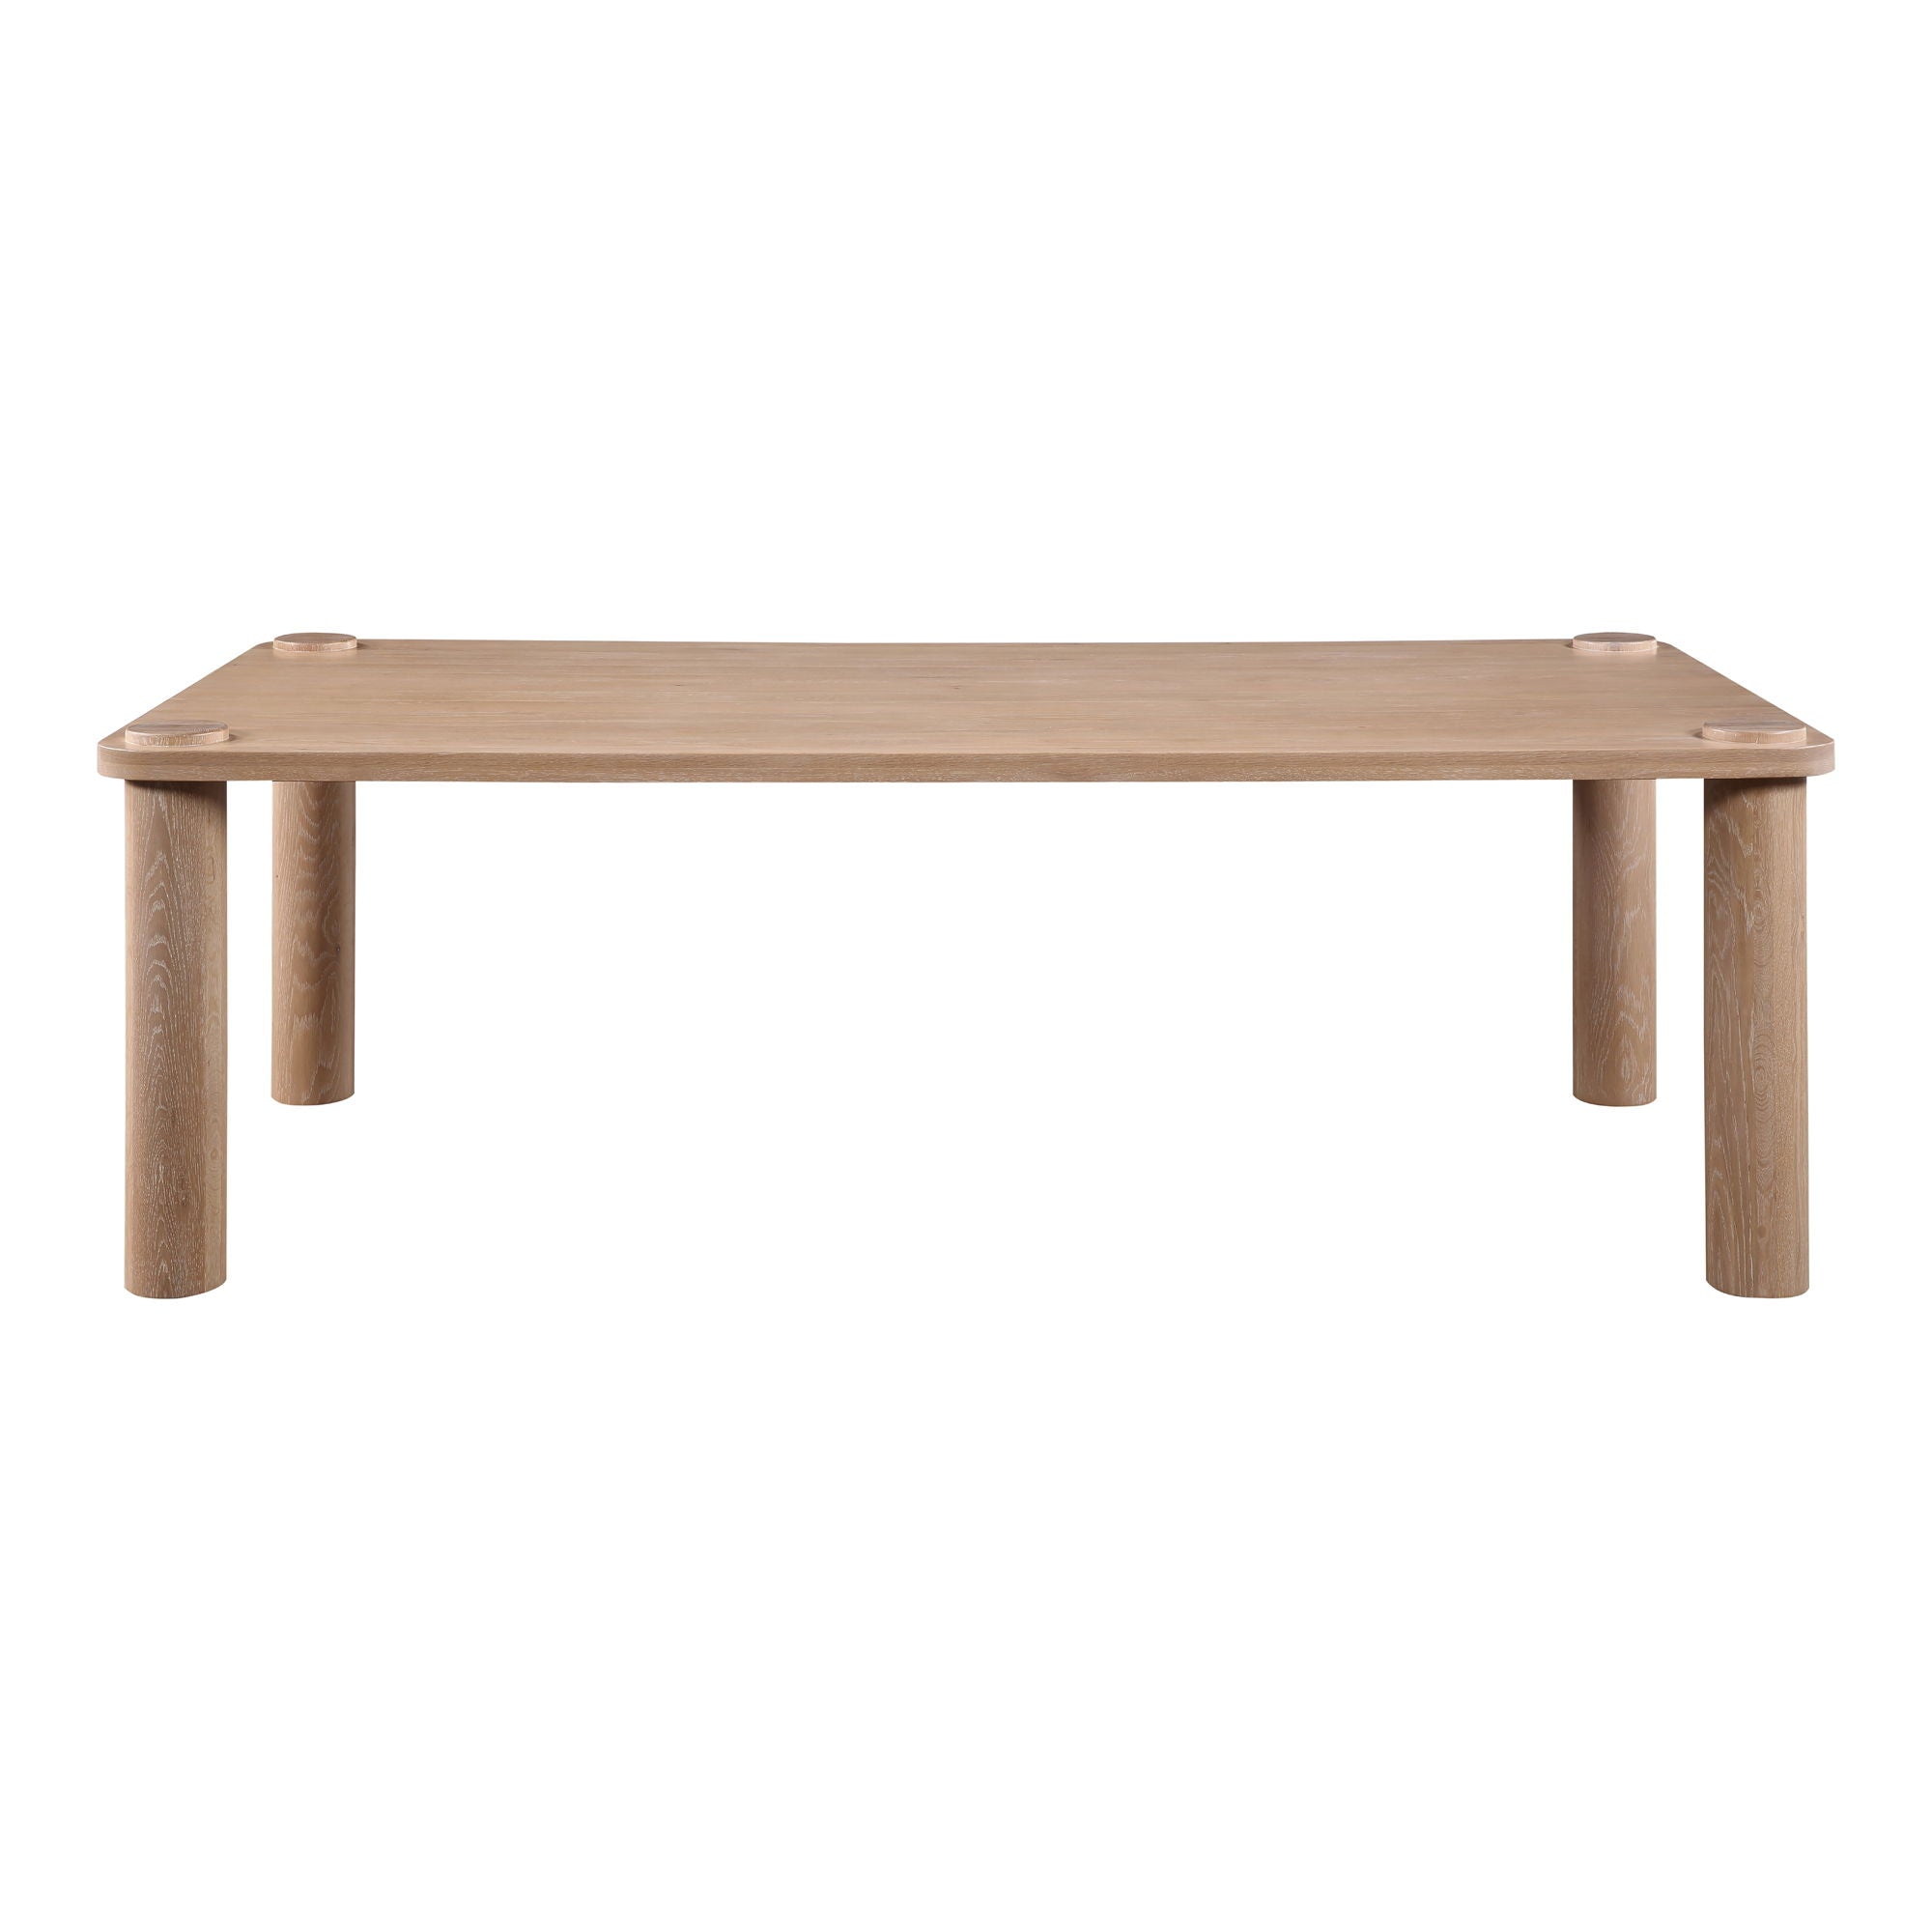 Century - Dining Table - White Wash